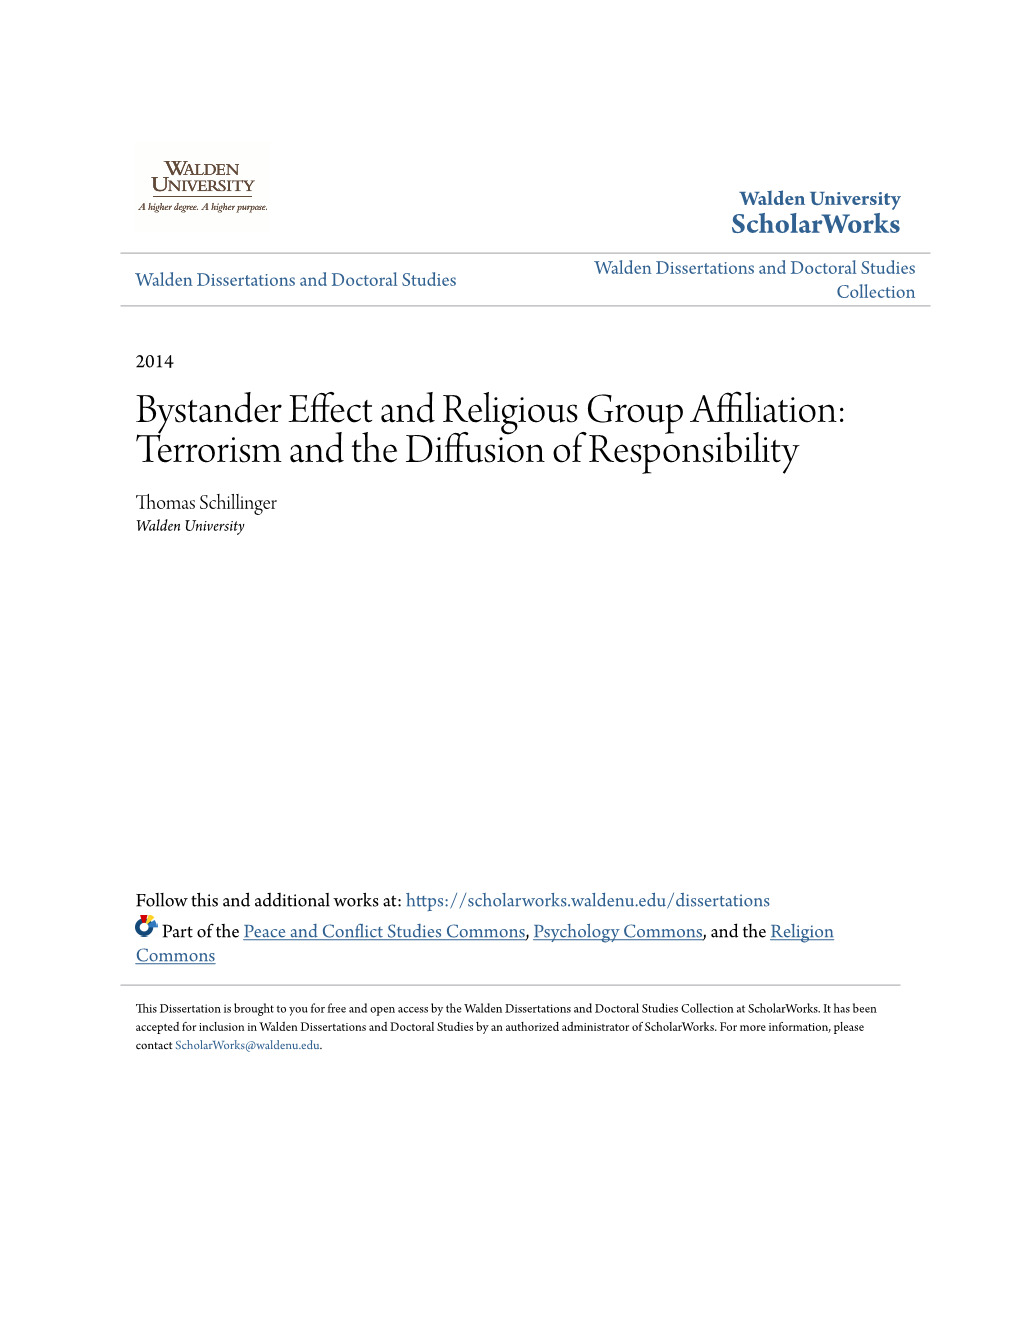 Bystander Effect and Religious Group Affiliation: Terrorism and the Diffusion of Responsibility Thomas Schillinger Walden University